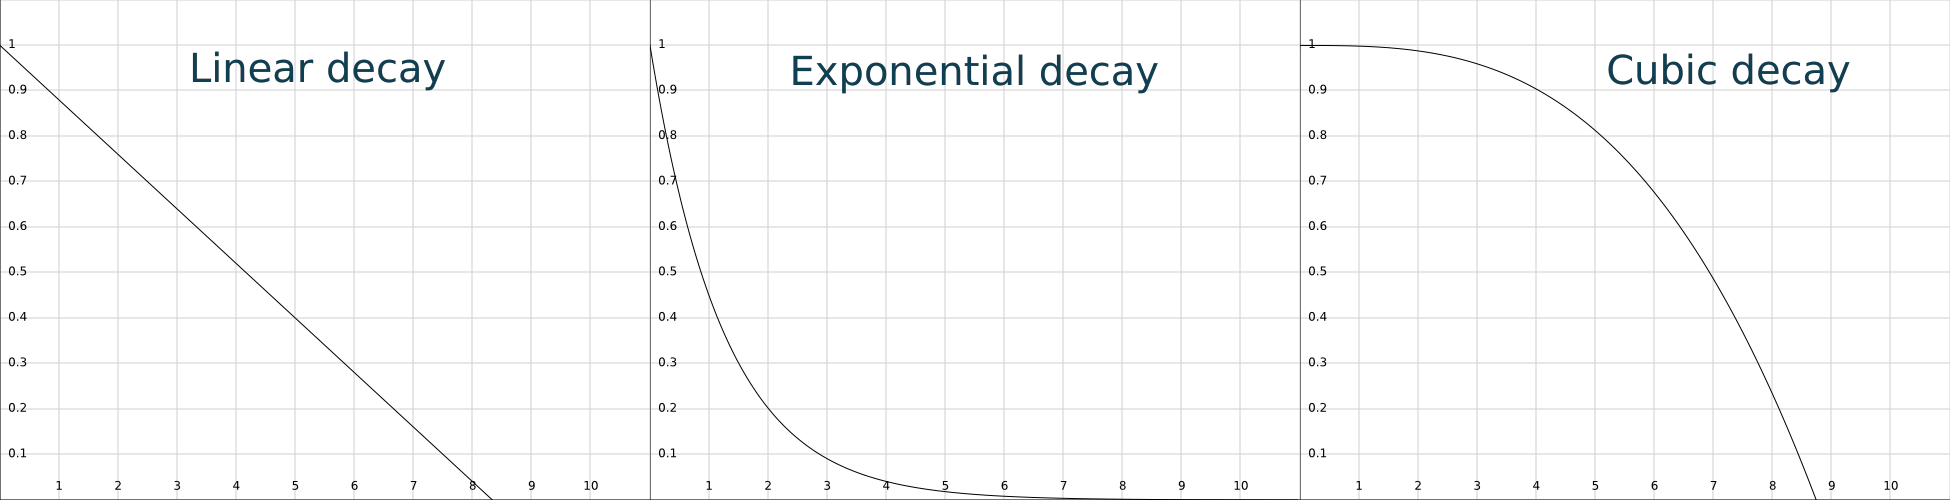 Linear, exponential, and cubic decay graphs